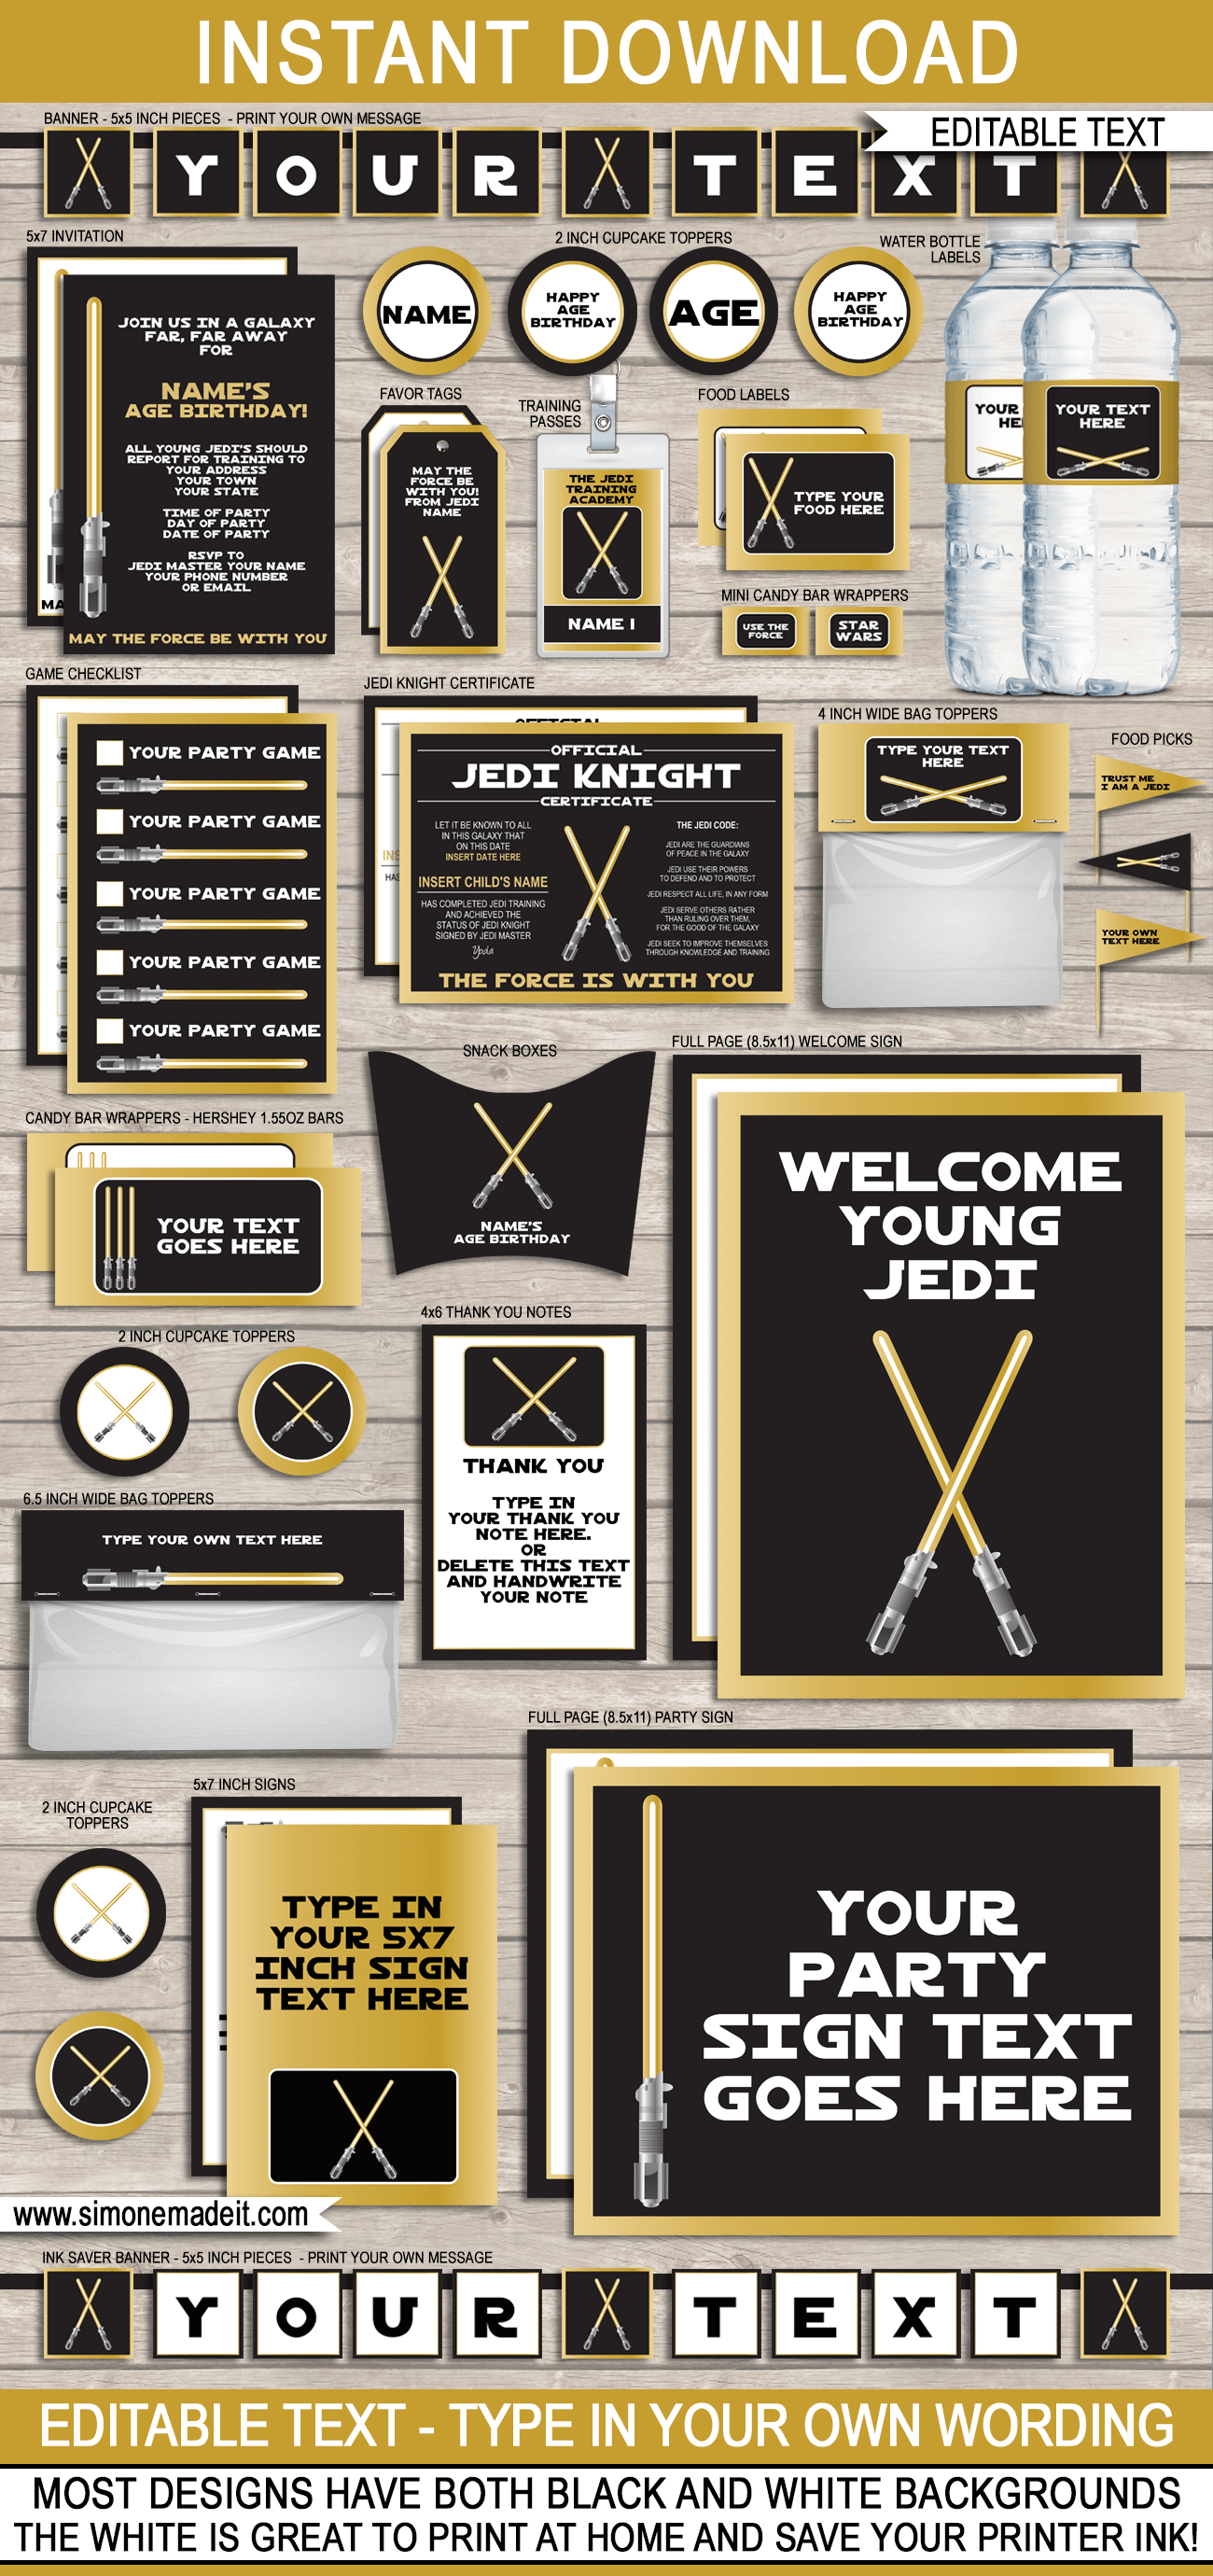 Gold Star Wars Birthday Party Printables, Invitations & Decorations | Editable Themed Templates | Full Package | INSTANT DOWNLOAD $12.50 via SIMONEmadeit.com